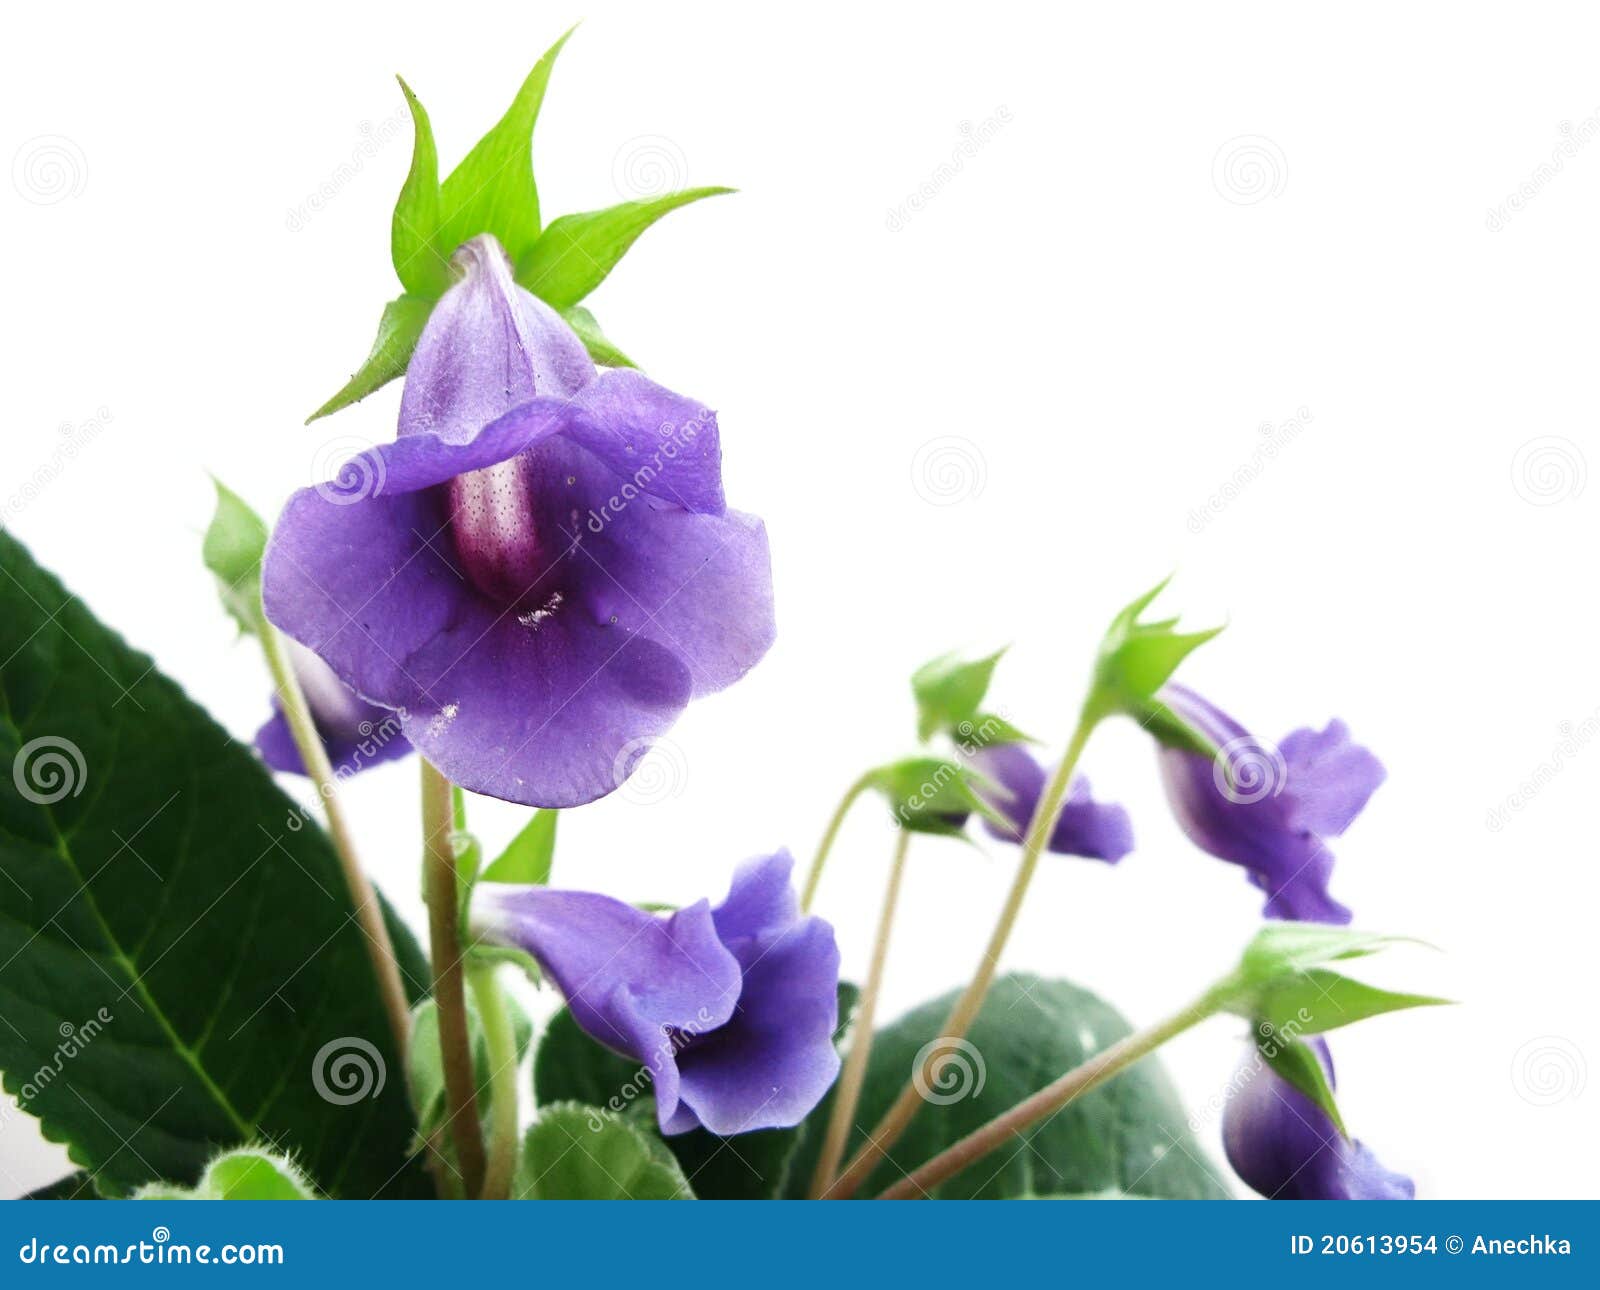 Violet sinningia. Sinningia with violet flowers isolated on white background close-up